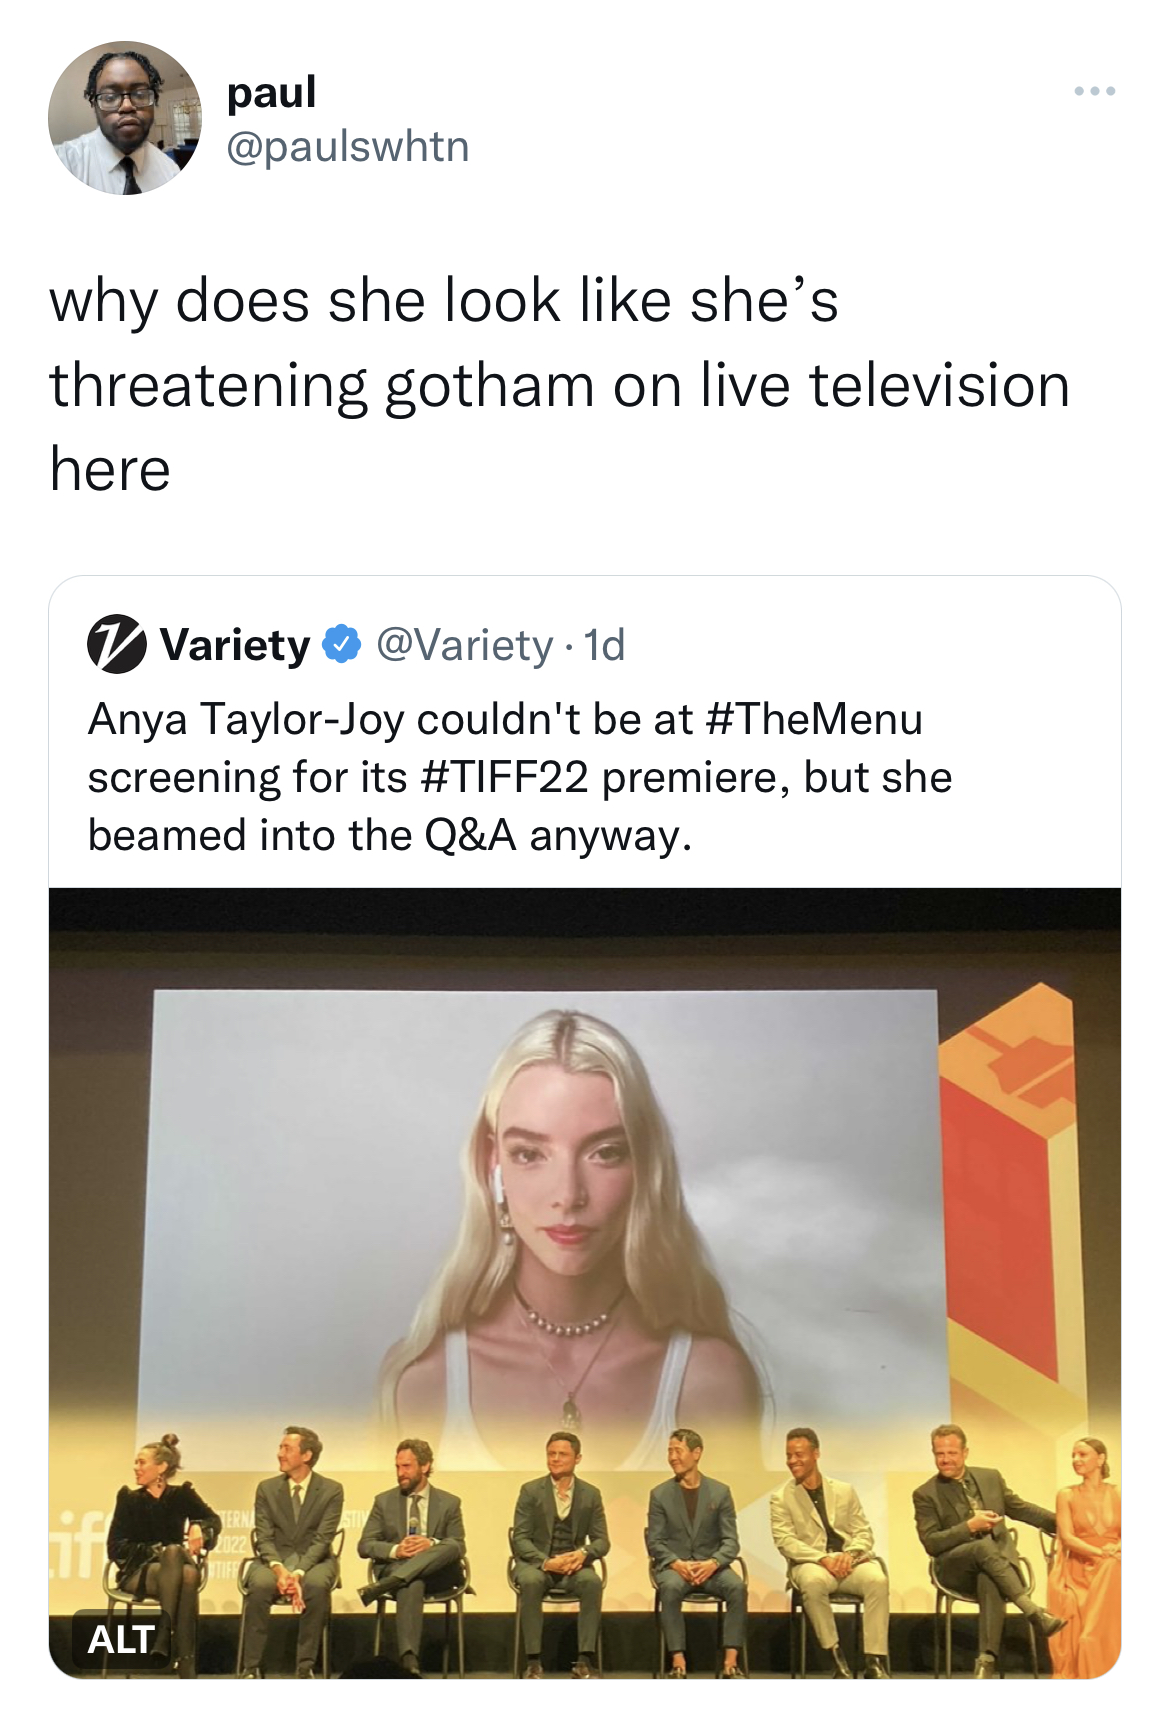 Fresh Daily Tweets - human behavior - paul why does she look she's threatening gotham on live television here Variety Anya TaylorJoy couldn't be at screening for its premiere, but she beamed into the Q&A anyway. Alt He